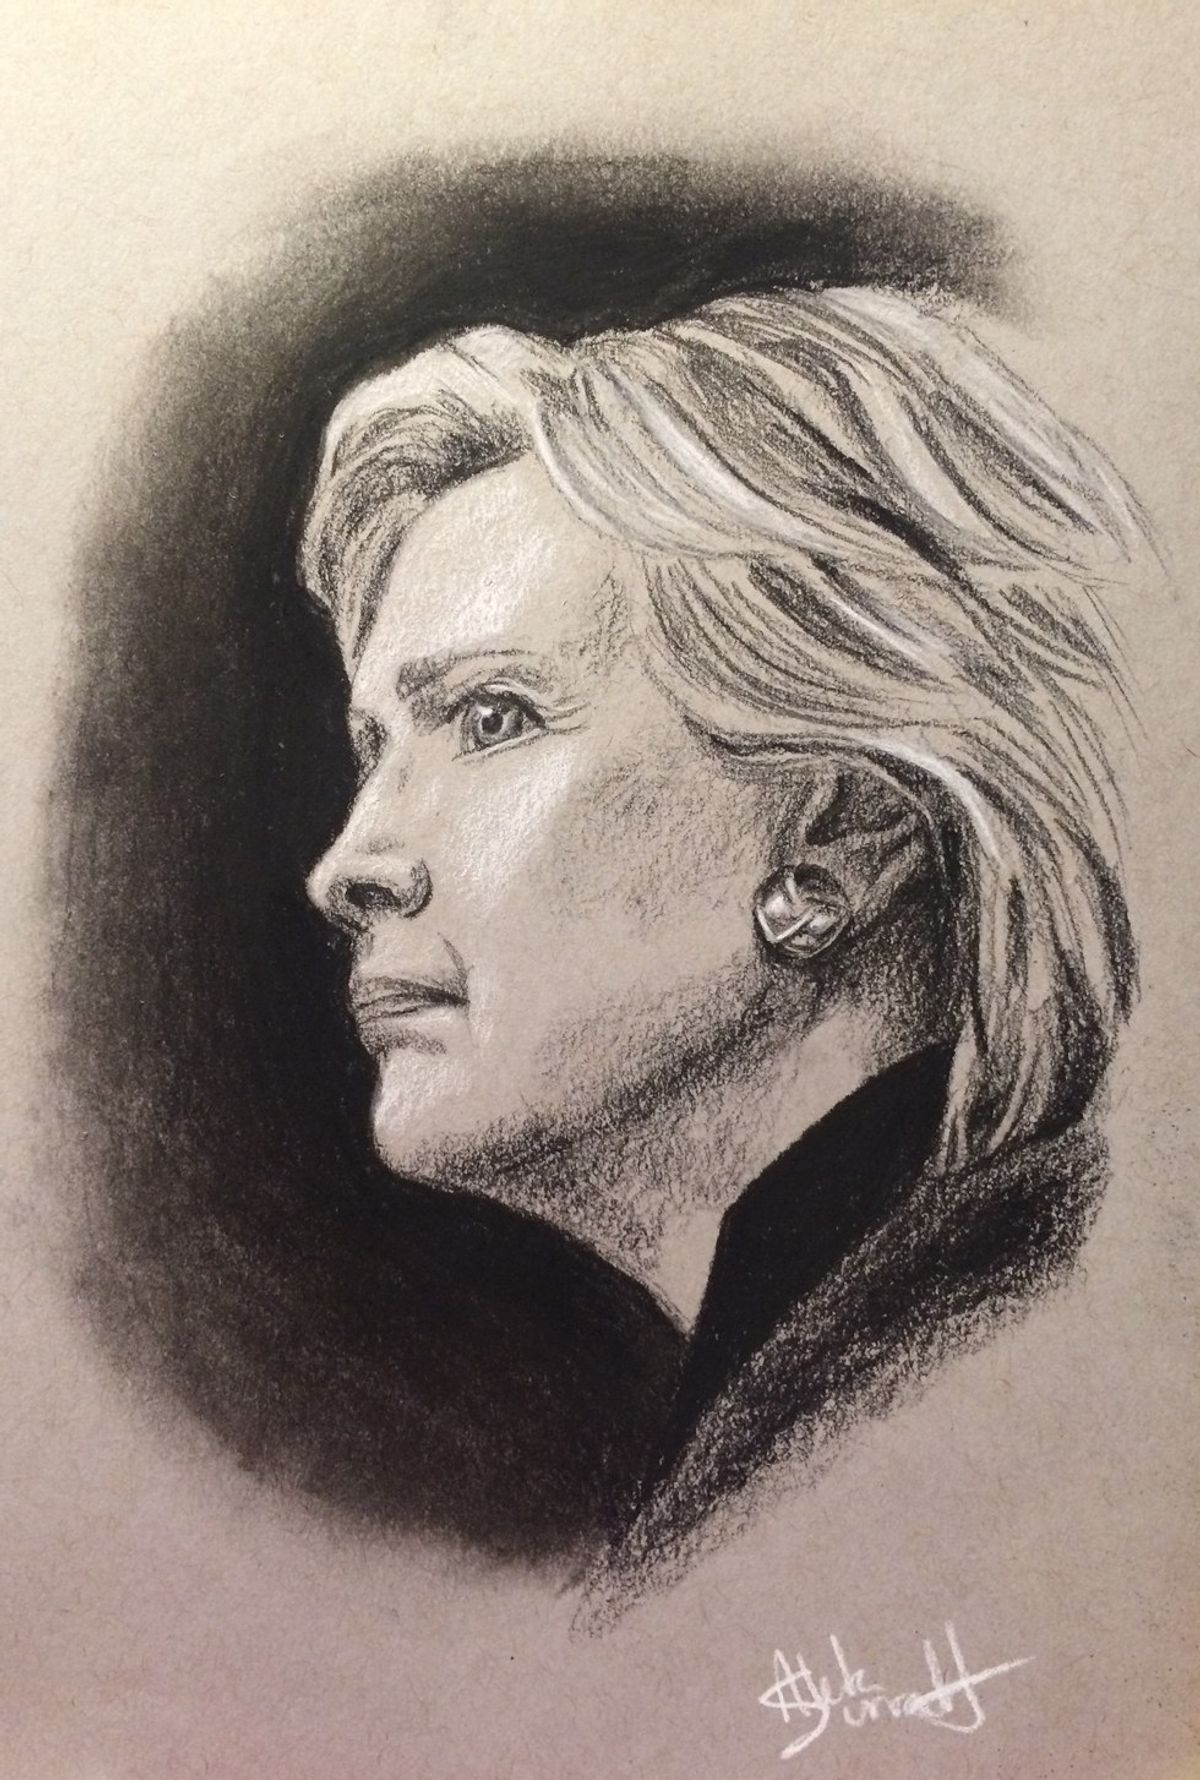 Video: Hillary Clinton Speed Drawing